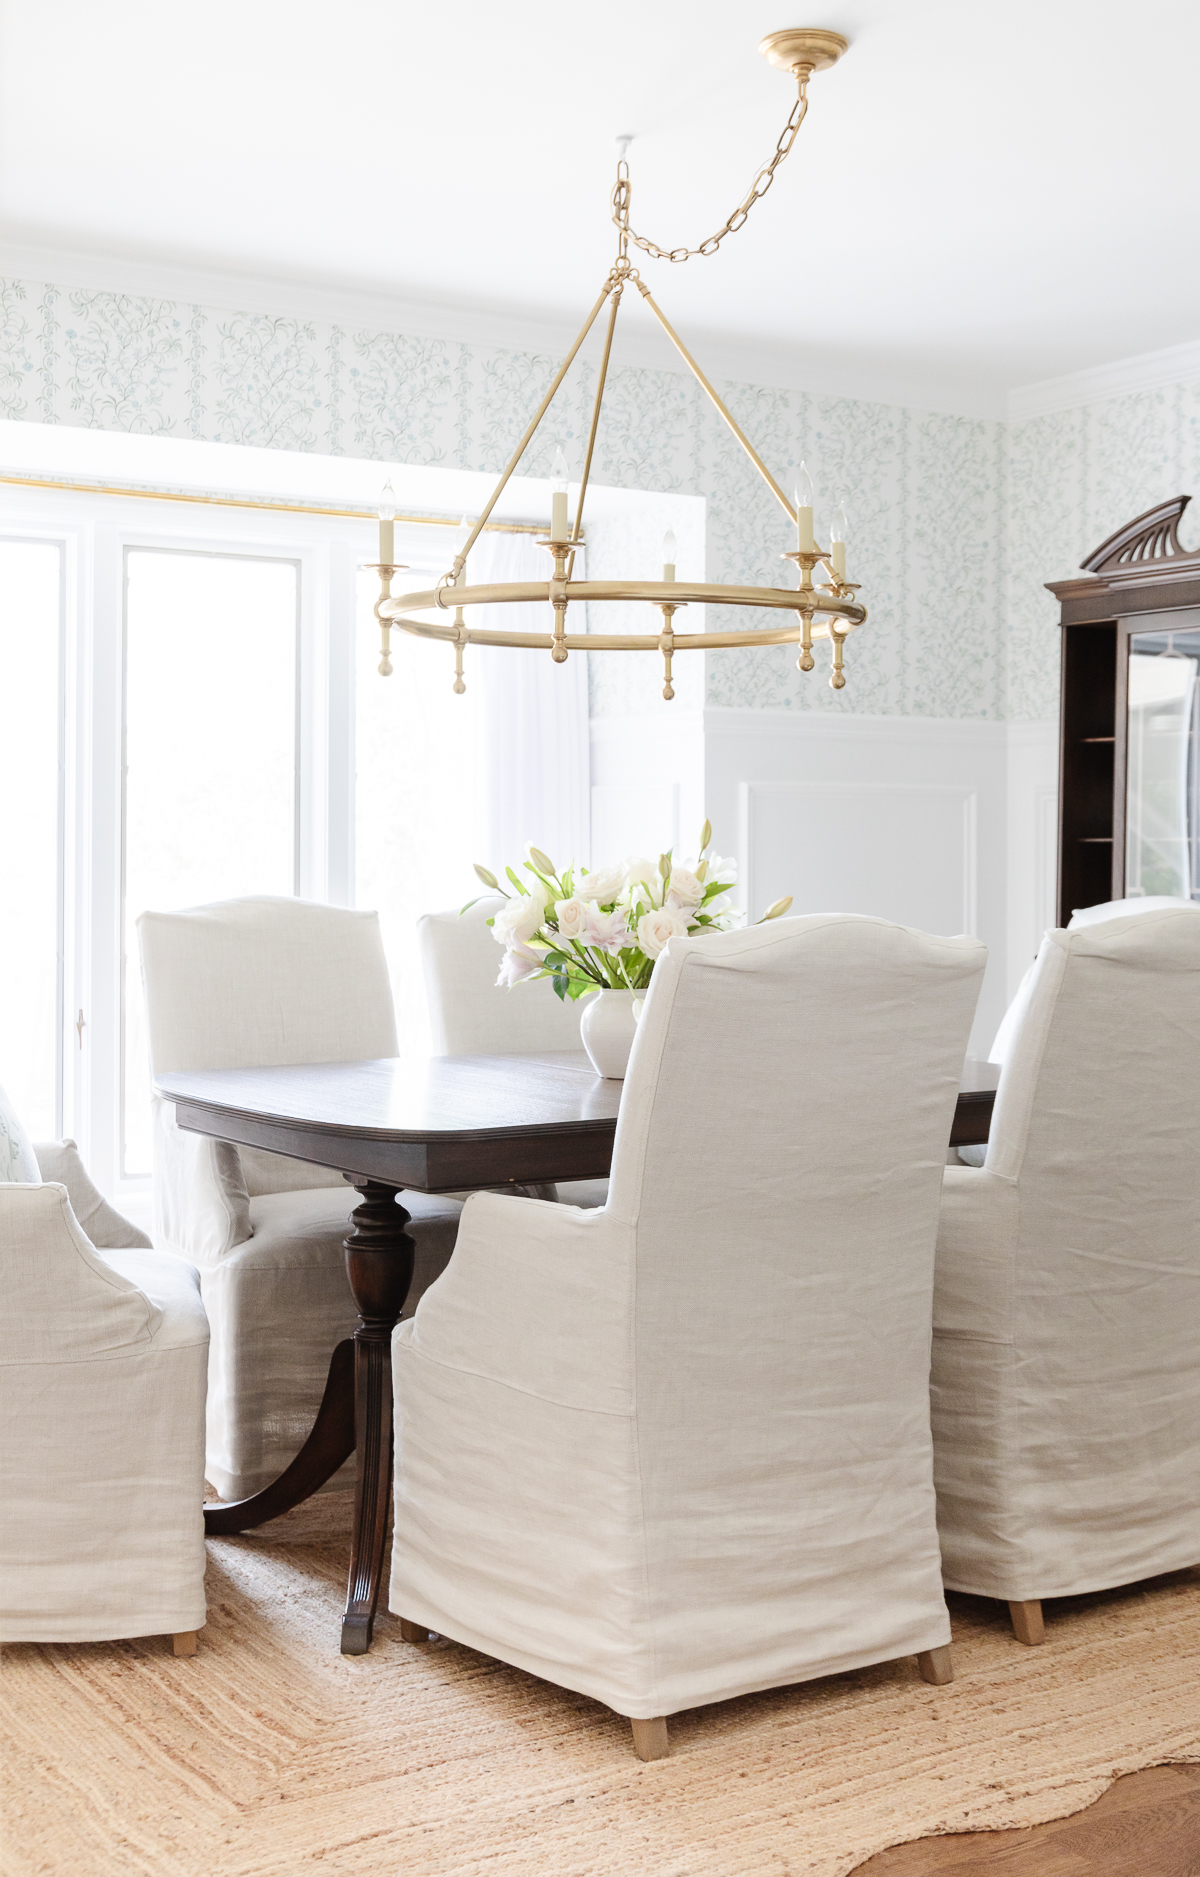 A dining room with white chairs and a chandelier, perfect for Hosting Thanksgiving.